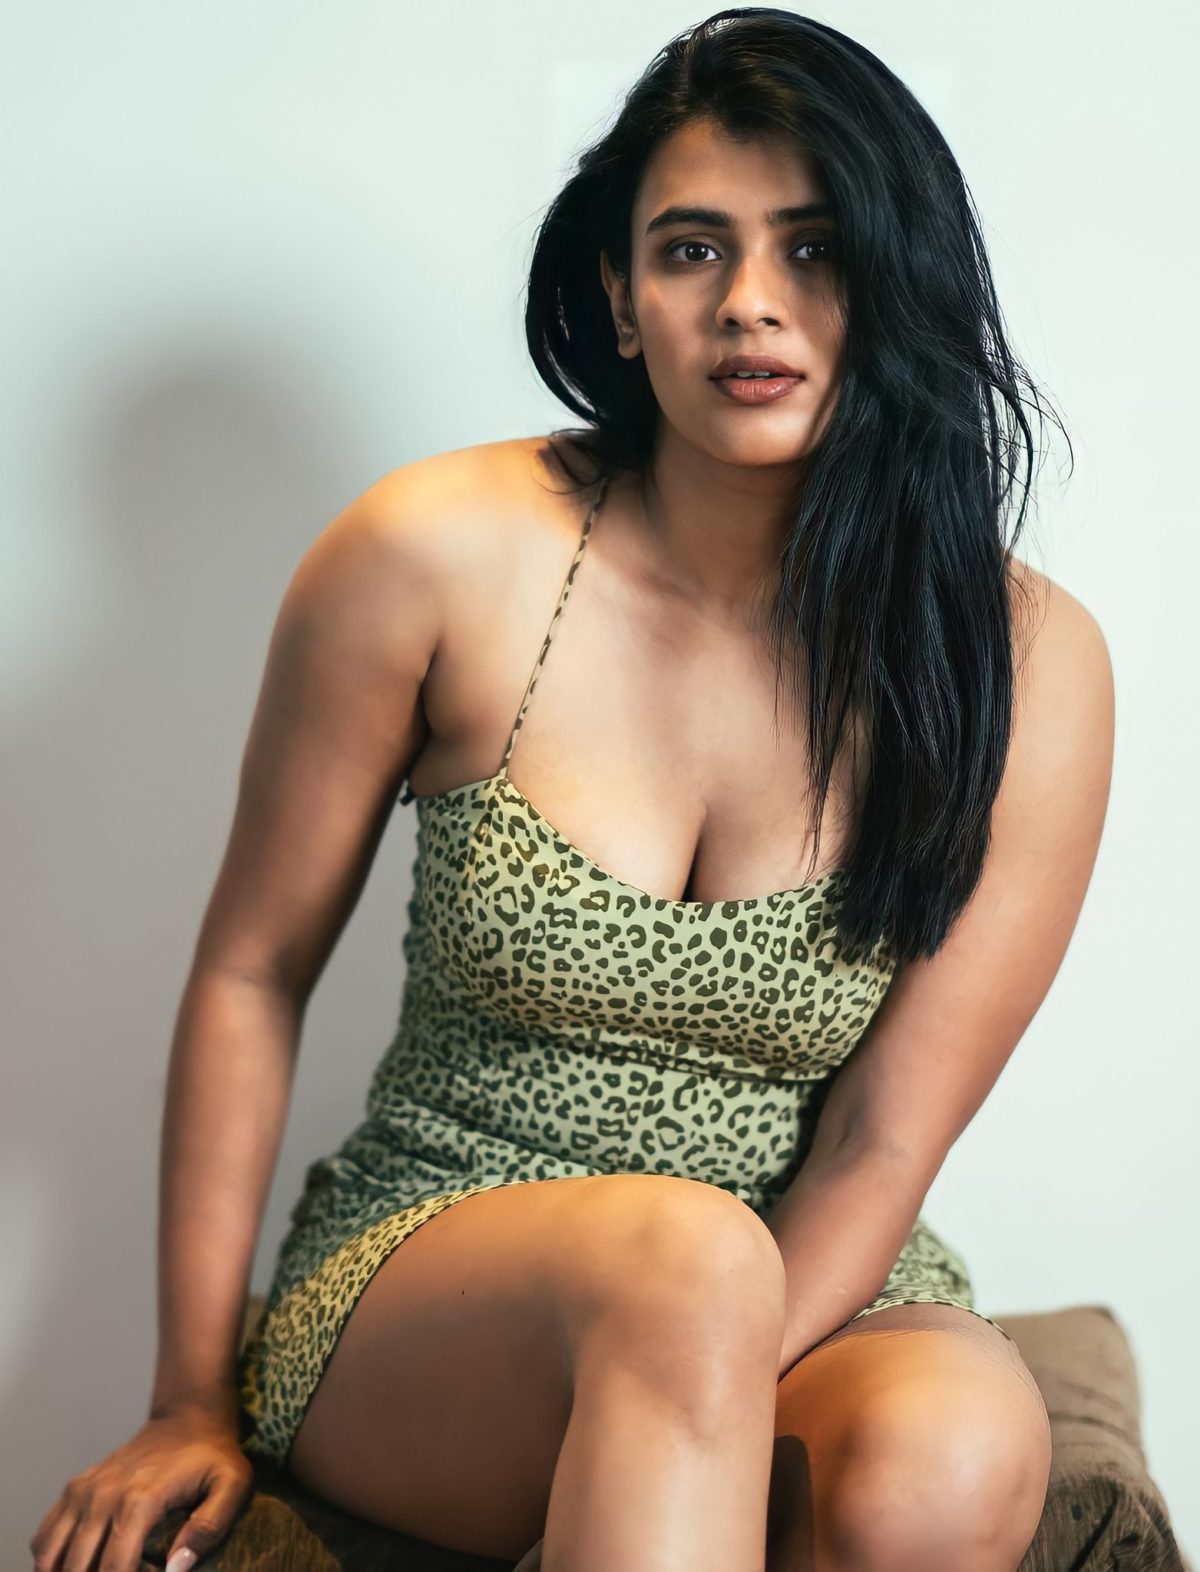 Hebah Patel Looks Smoking Hot In This Sultry Short Dress